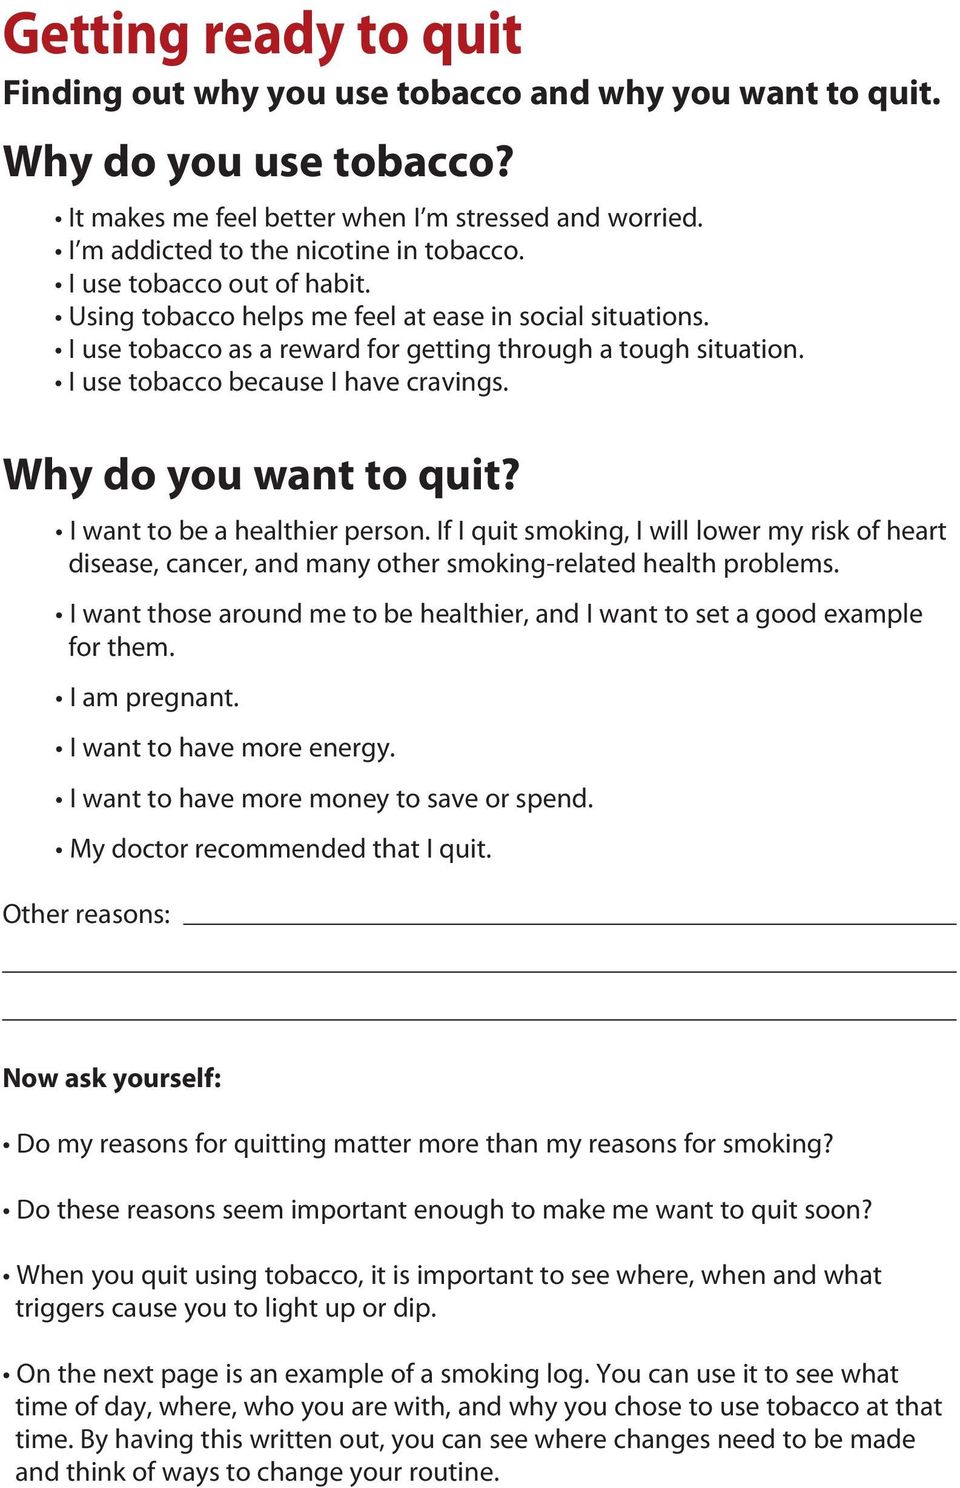 Why do you want to quit? I want to be a healthier person. If I quit smoking, I will lower my risk of heart disease, cancer, and many other smoking-related health problems.